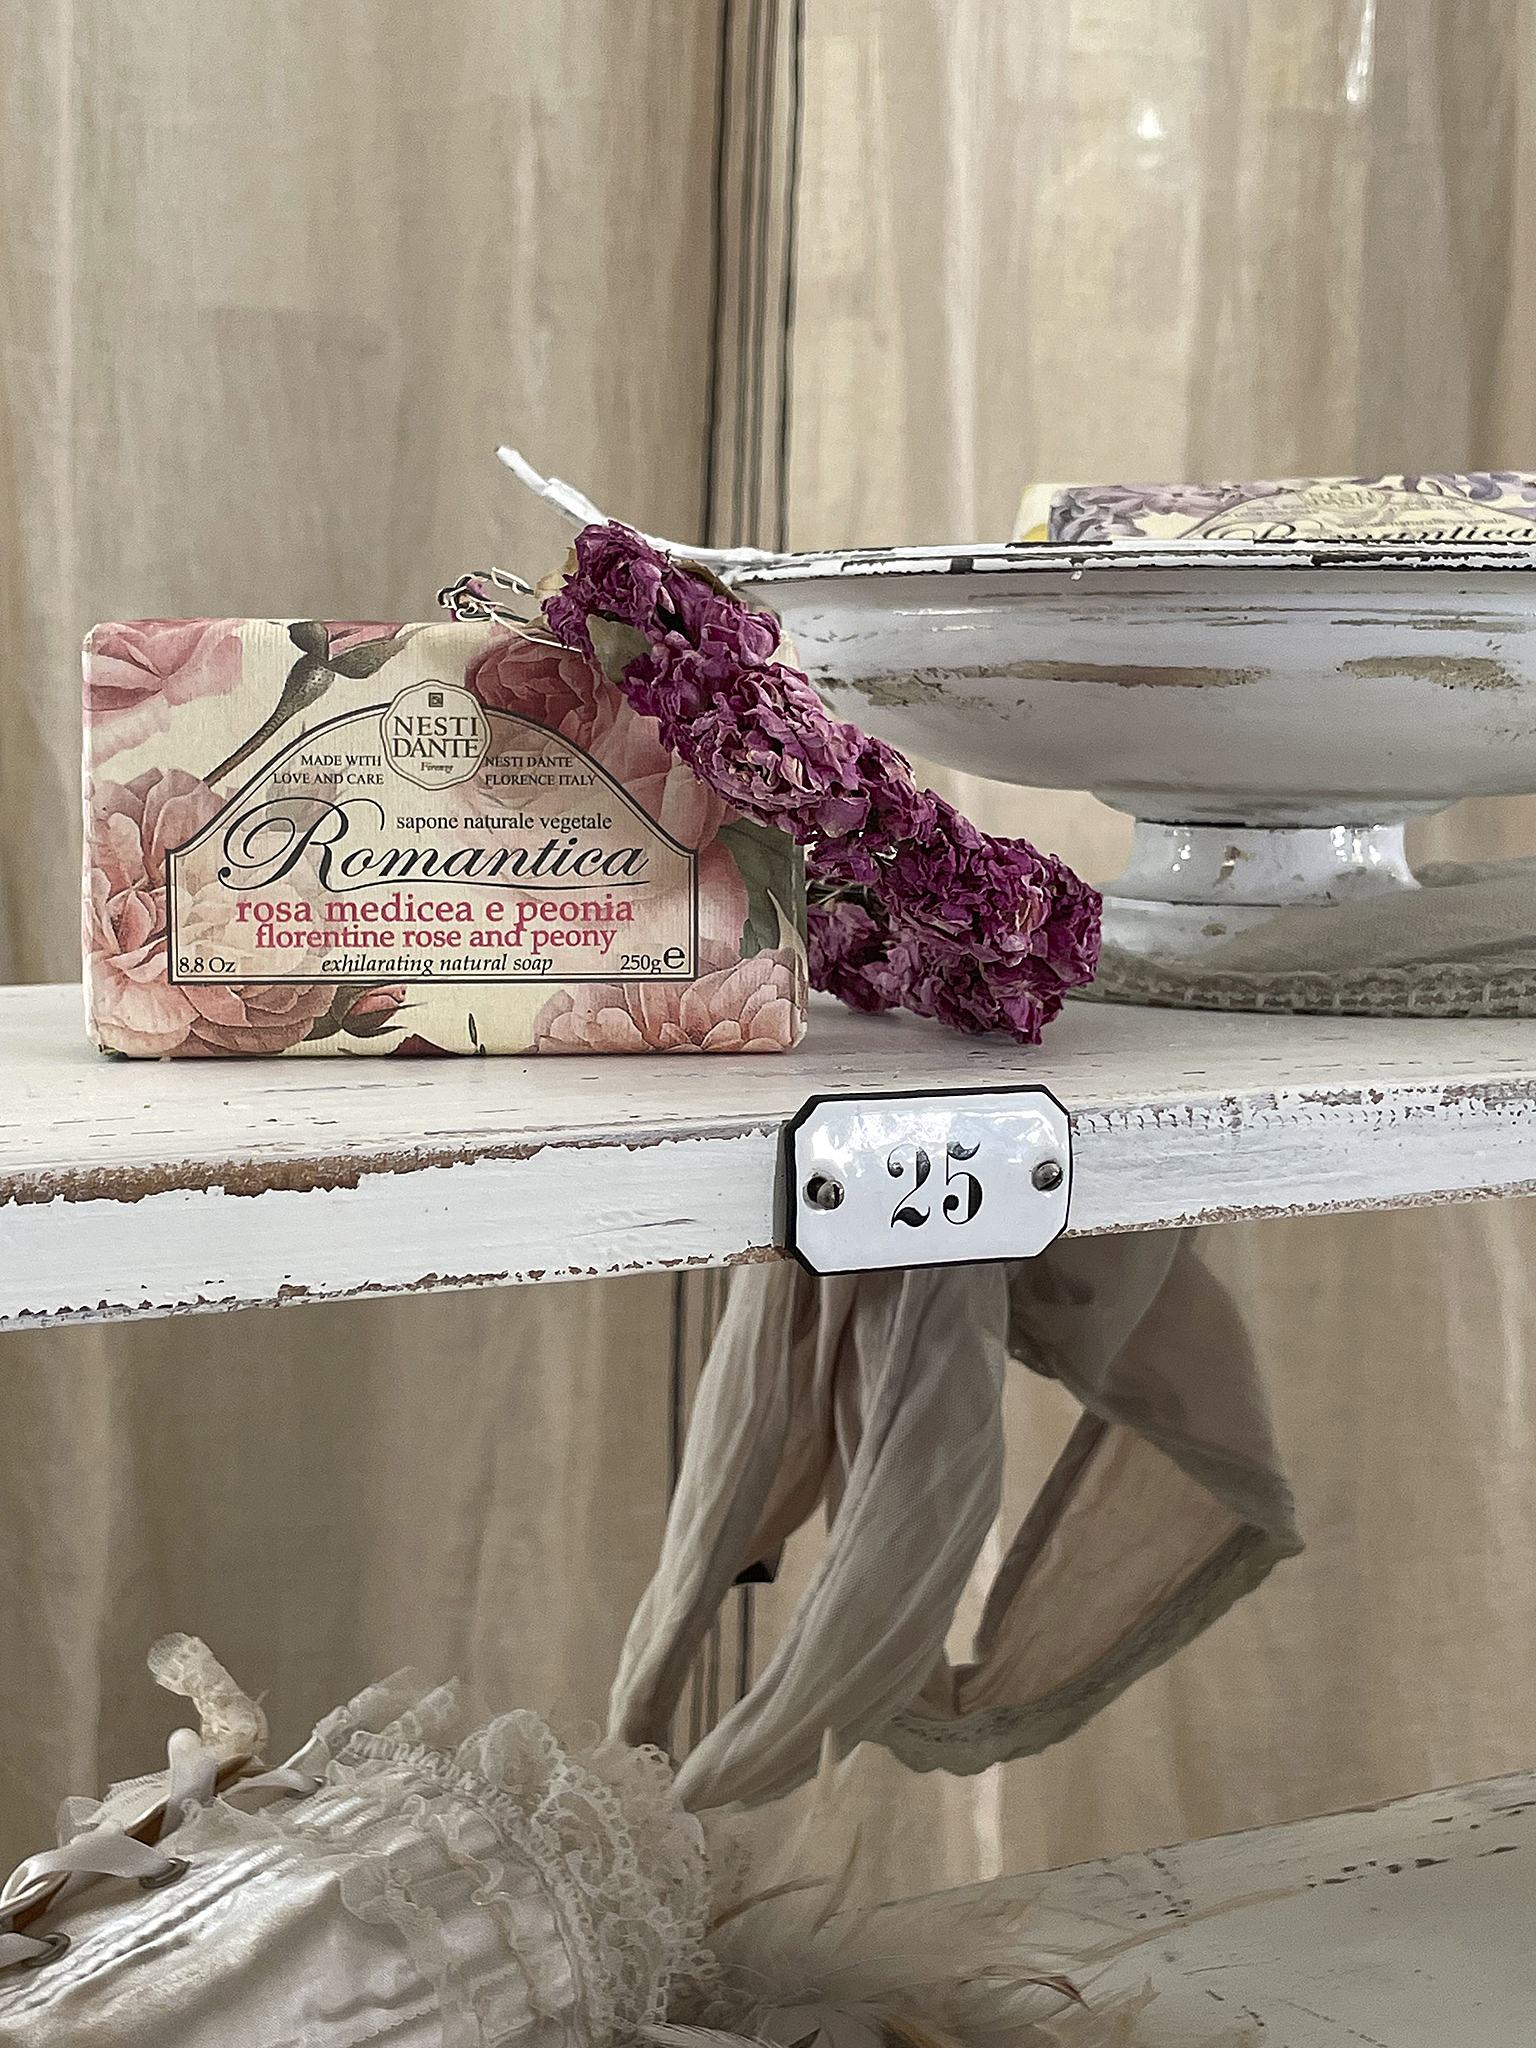 Reserviert! Altes Standregal Shabby-Chic No.25***